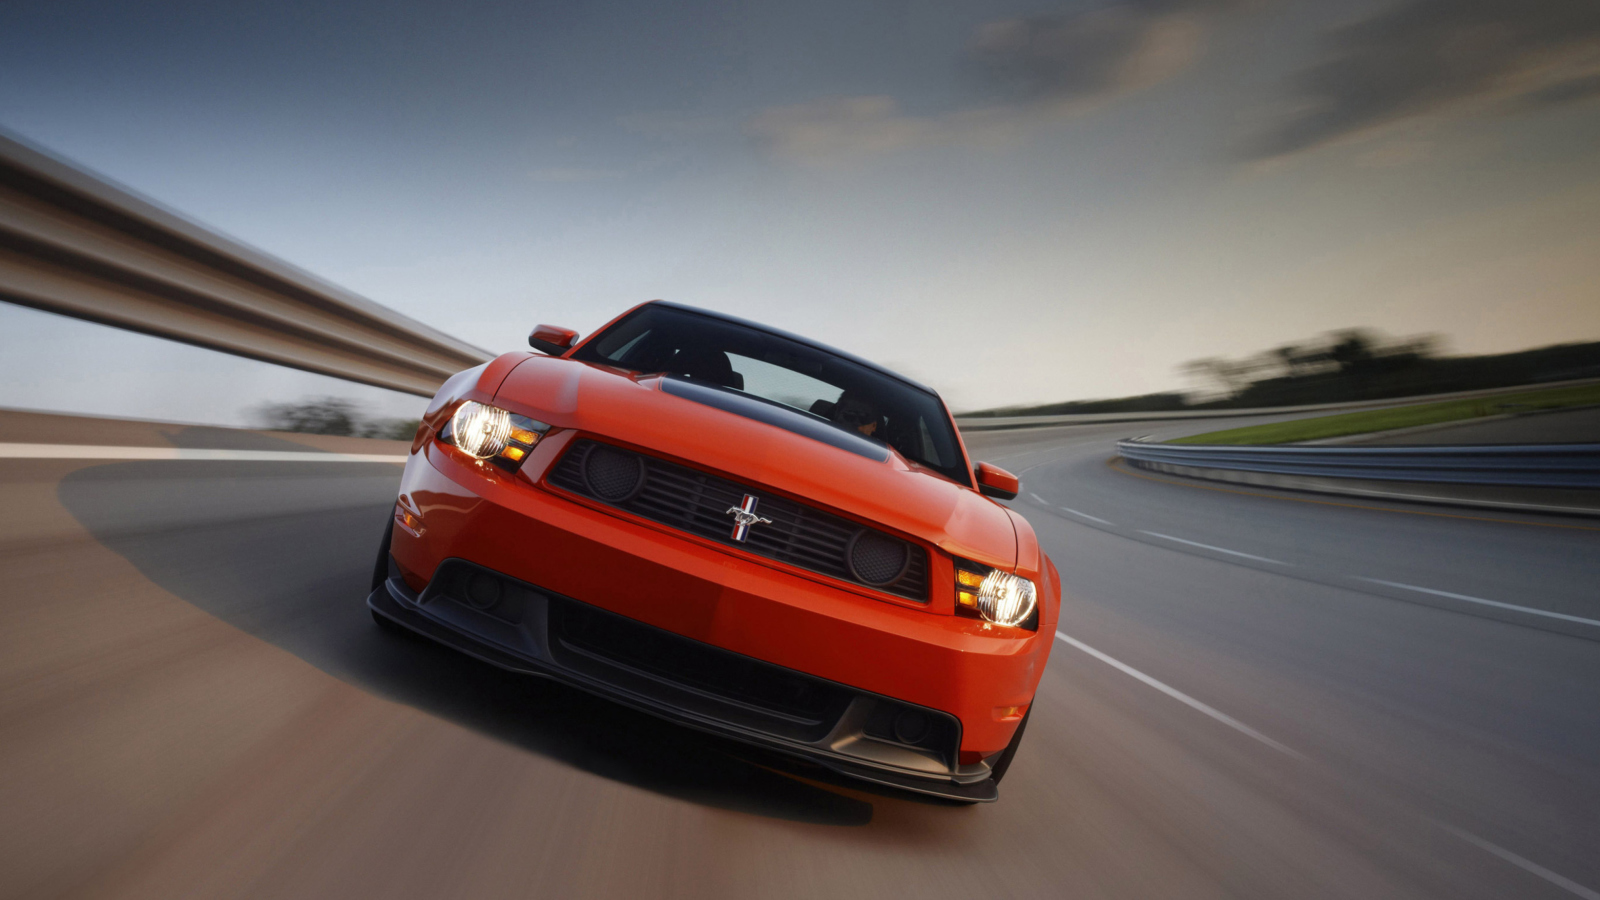 Das Red Cars Ford Mustang Wallpaper 1600x900